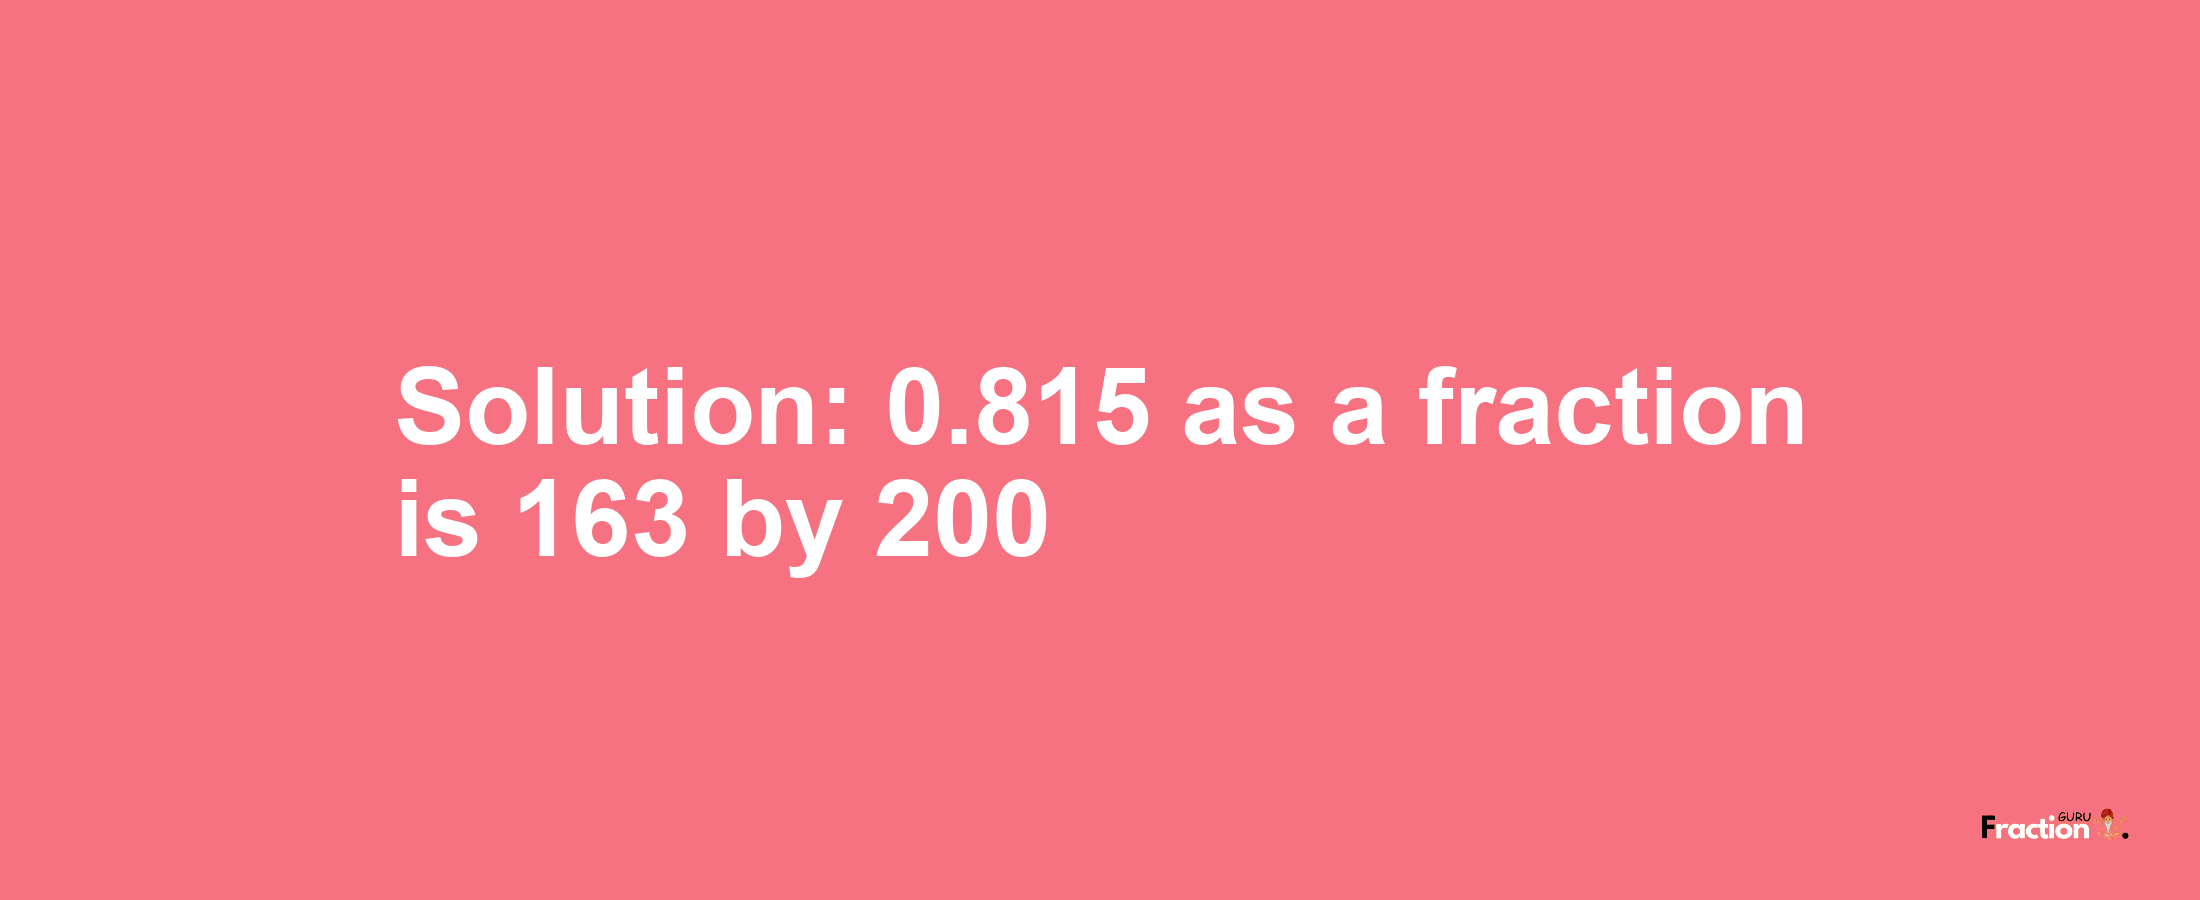 Solution:0.815 as a fraction is 163/200